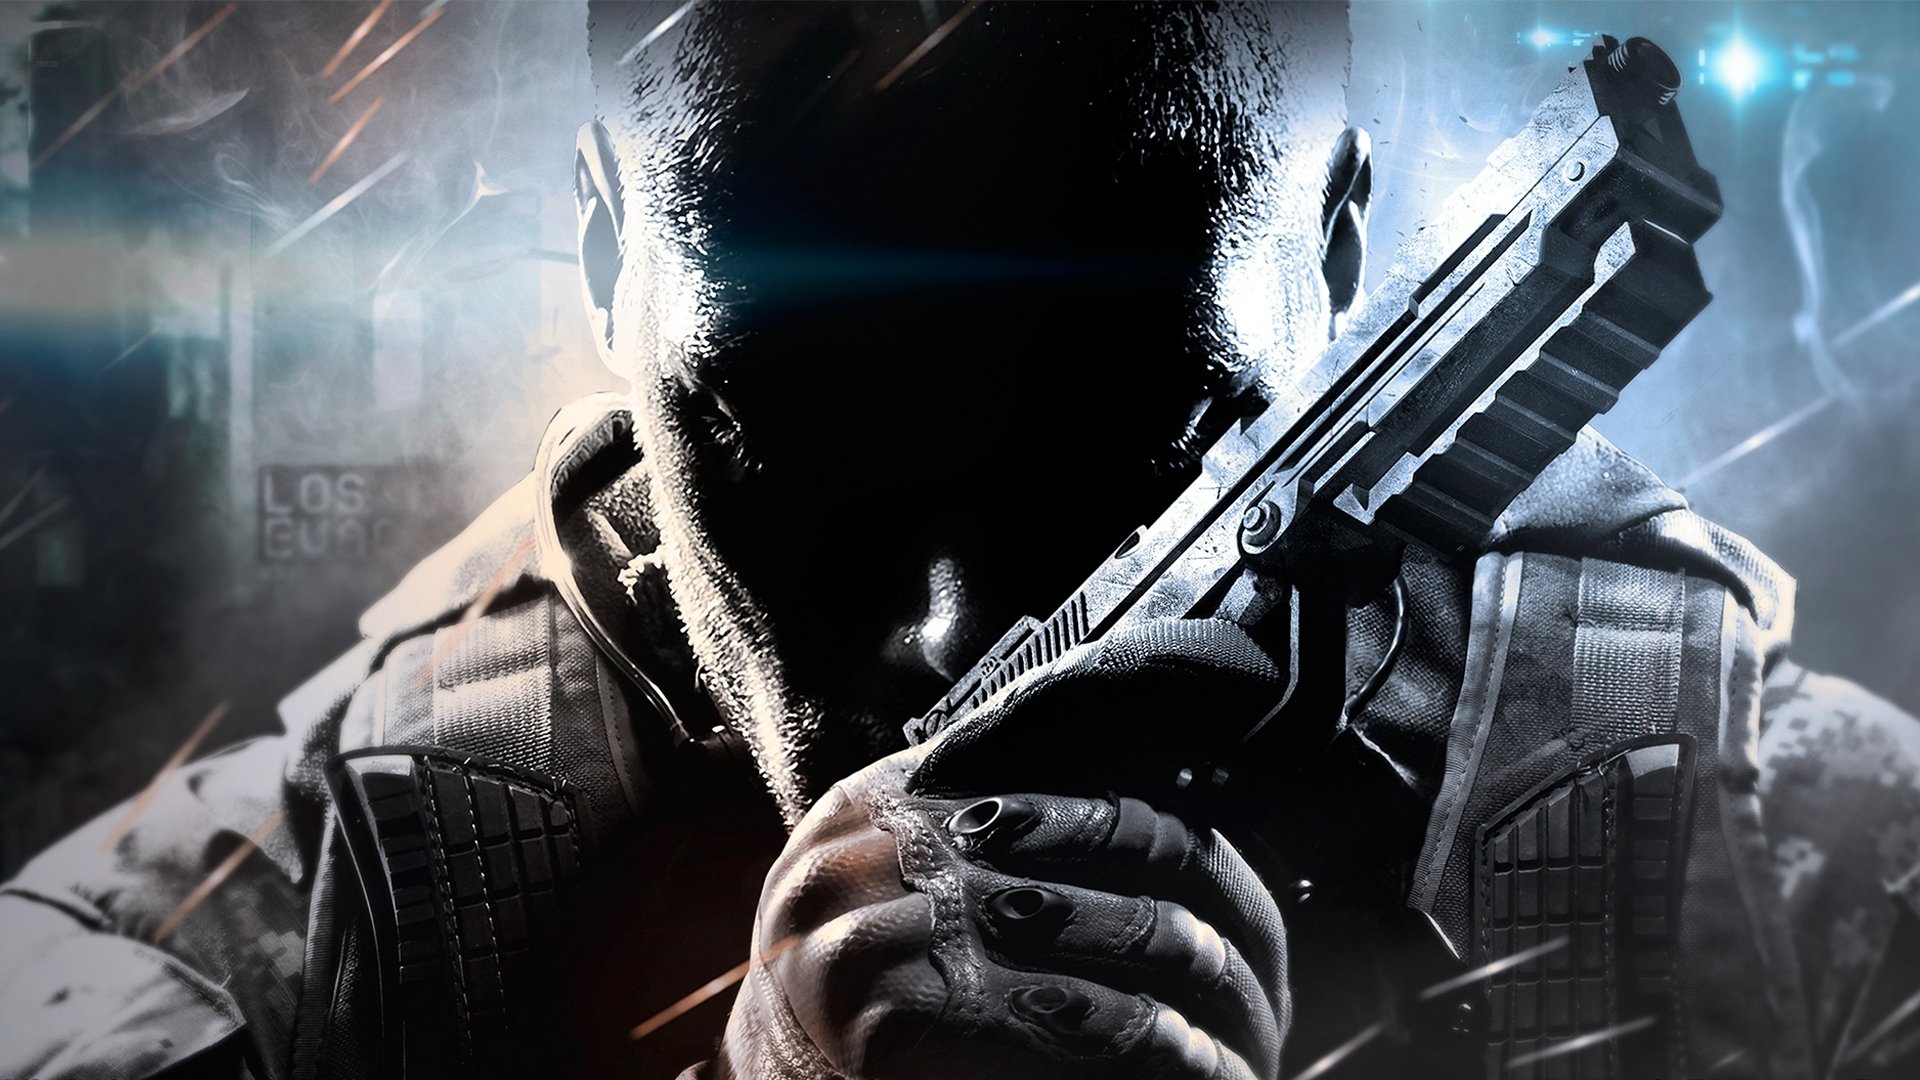 Call Of Duty Black Ops Wallpaper Hd Wallpaper Pictures to